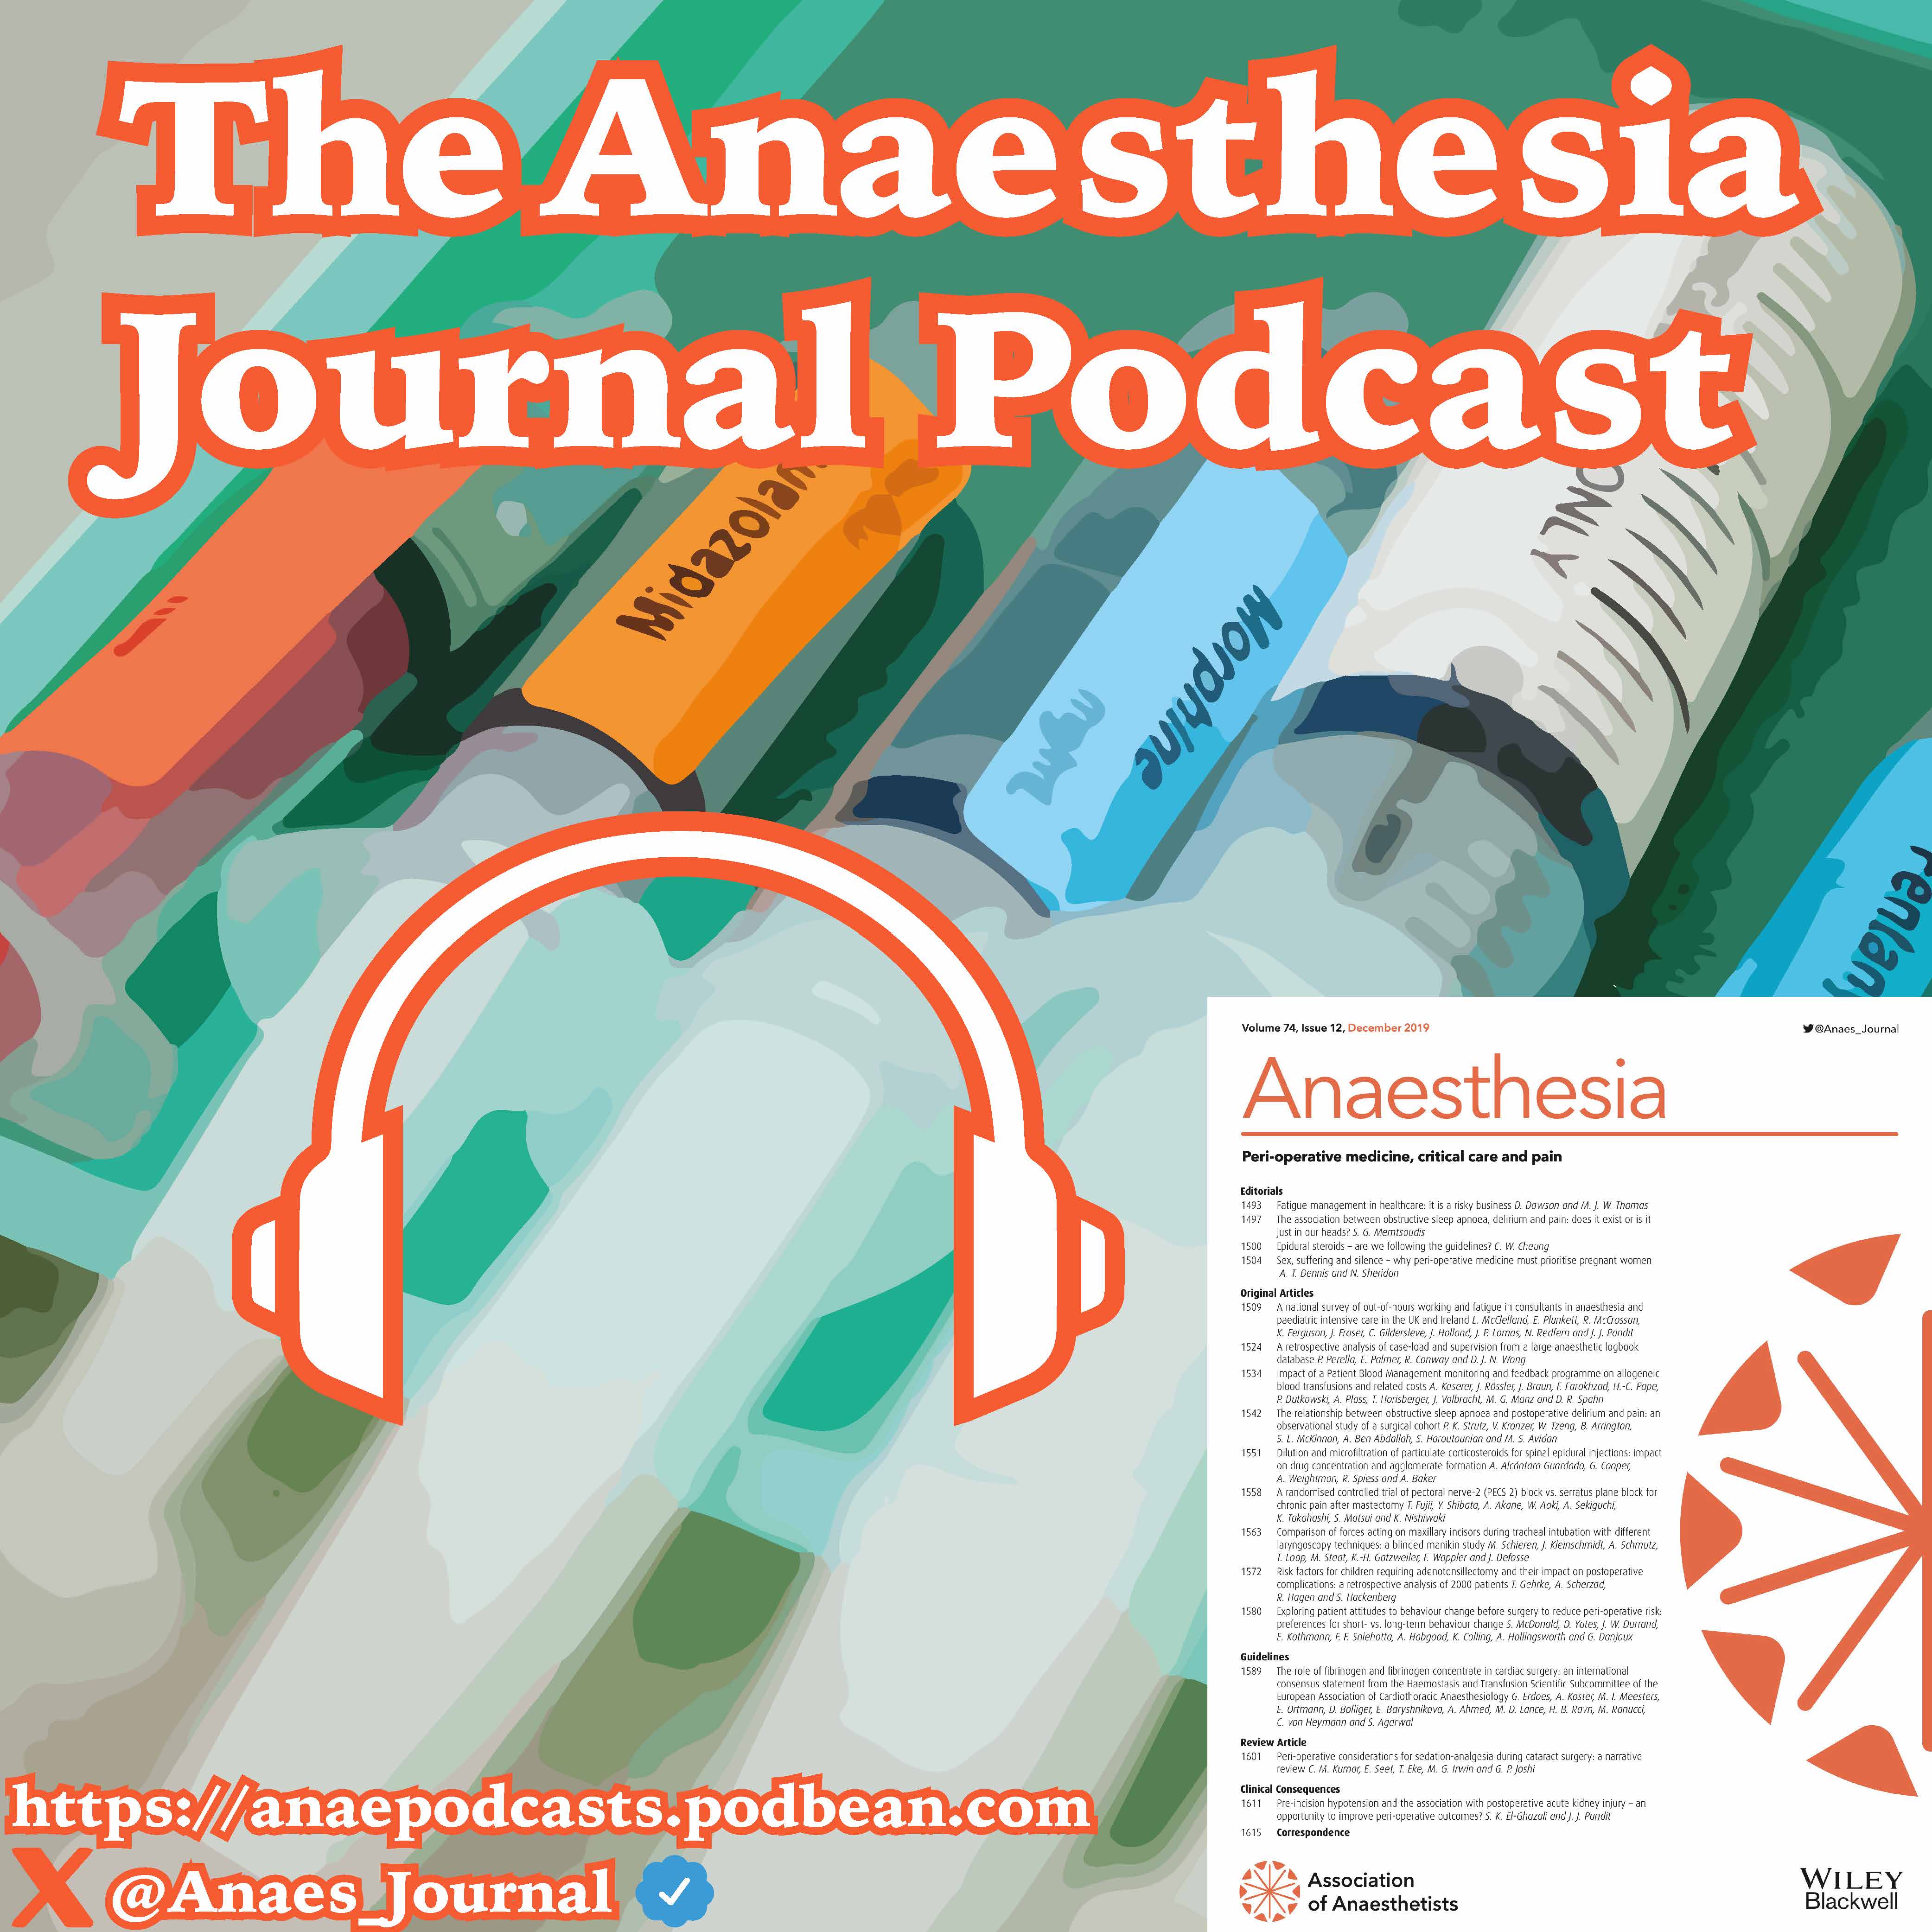 The Anaesthesia Journal Podcast